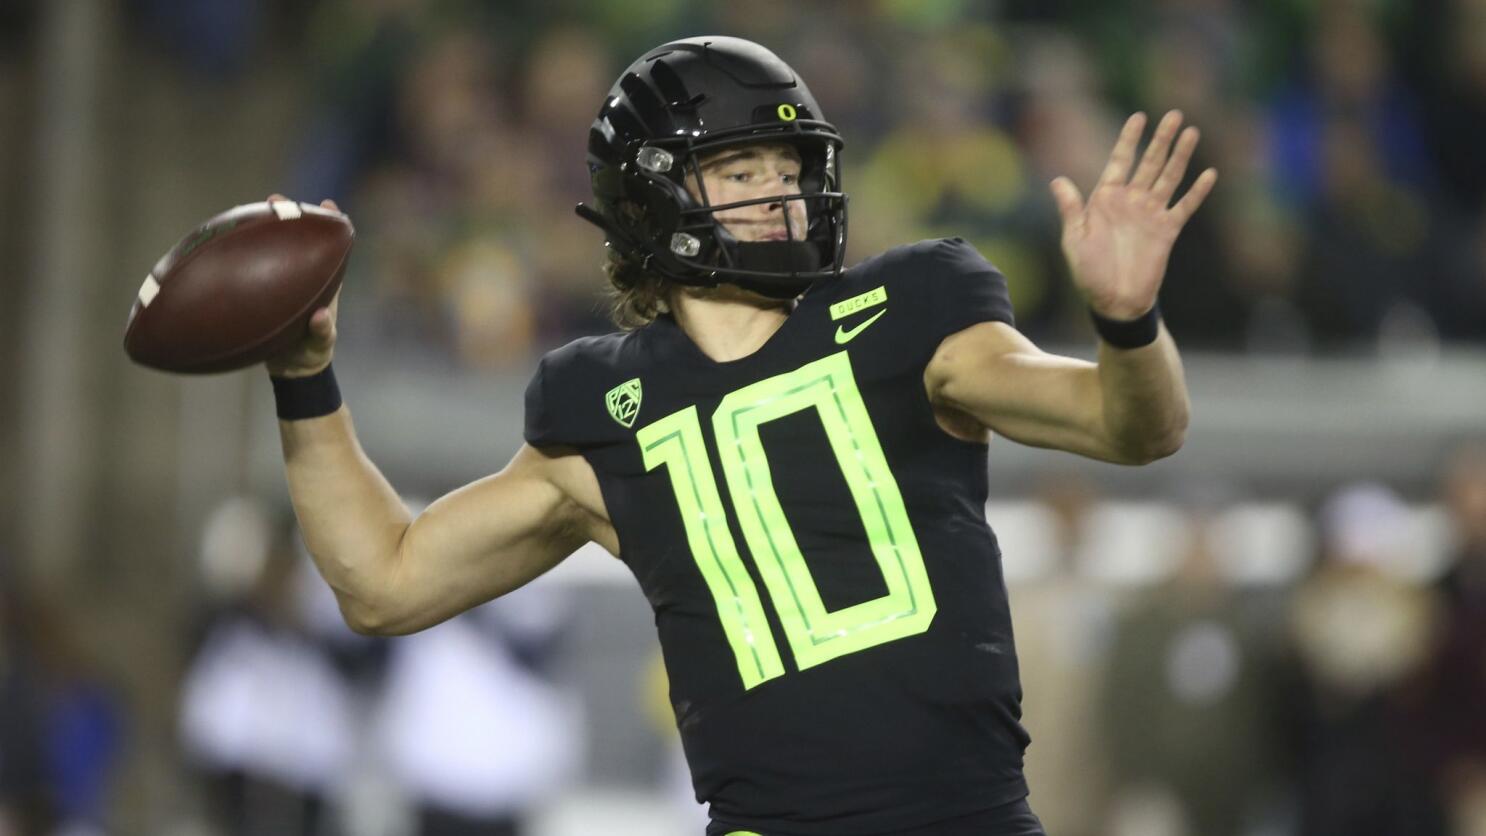 Staying for senior year was plus for Oregon QB Justin Herbert